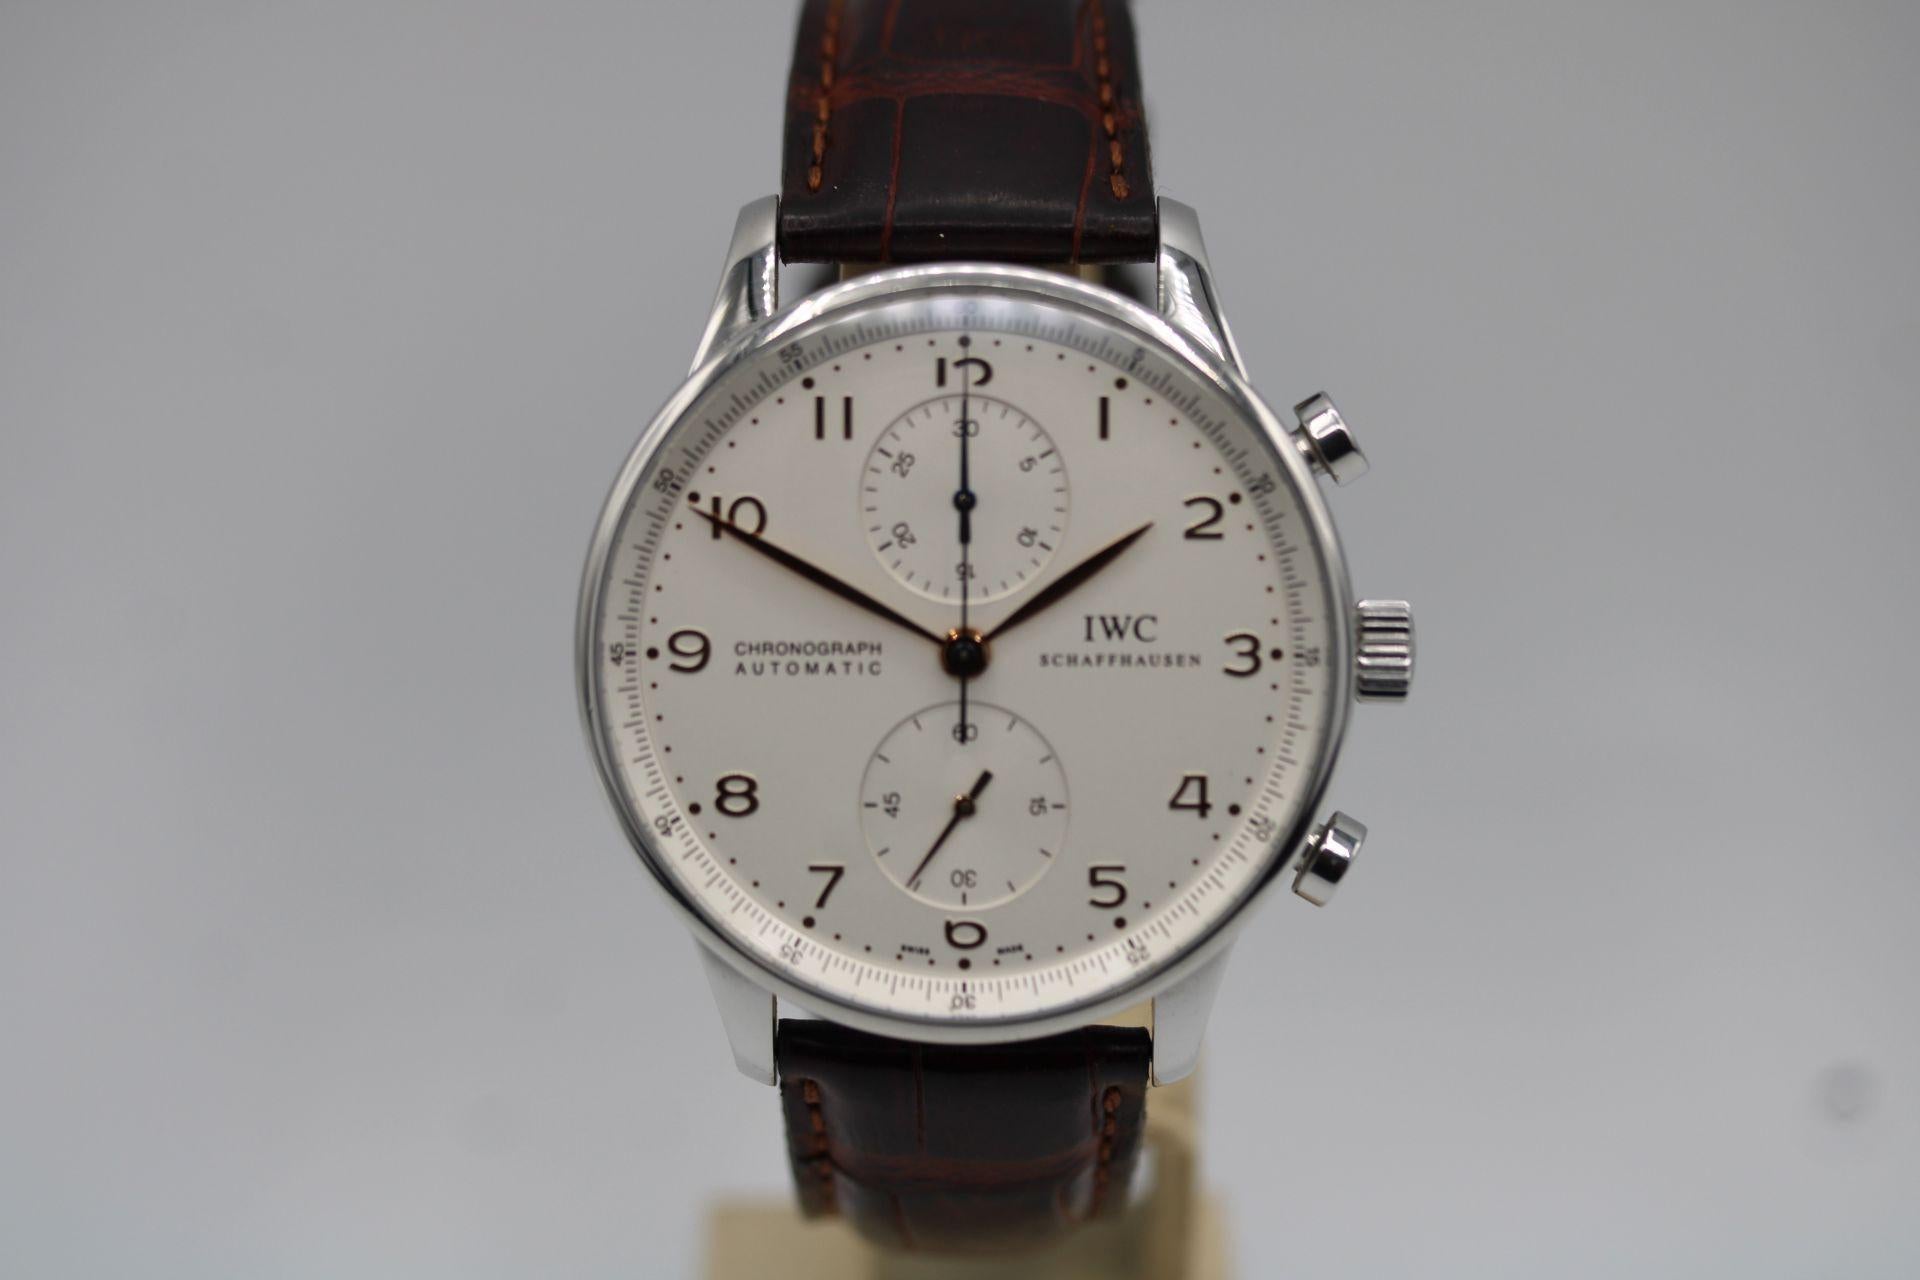 To many possibly considered the perfect dress watch and to those in the watch industry many hold the IWC Automatic movement in extremely high regard. A beautiful well made watch sums this IWC Portuguese Chronograph up perfectly and in our view